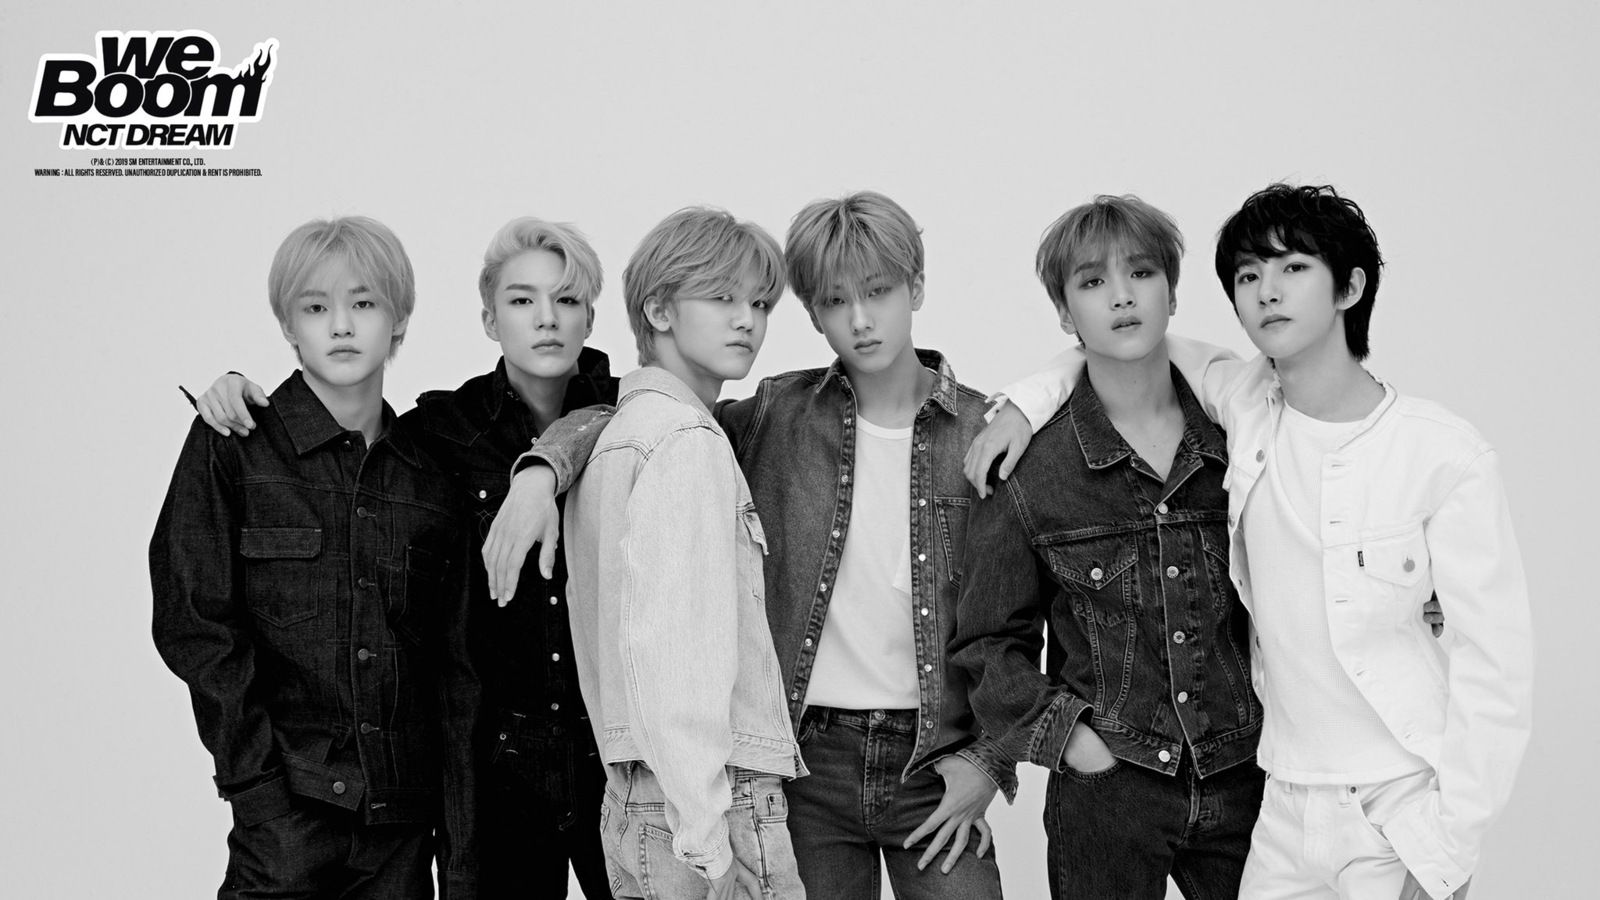 Petition · Turn NCT Dream into a fixed unit · Change.org